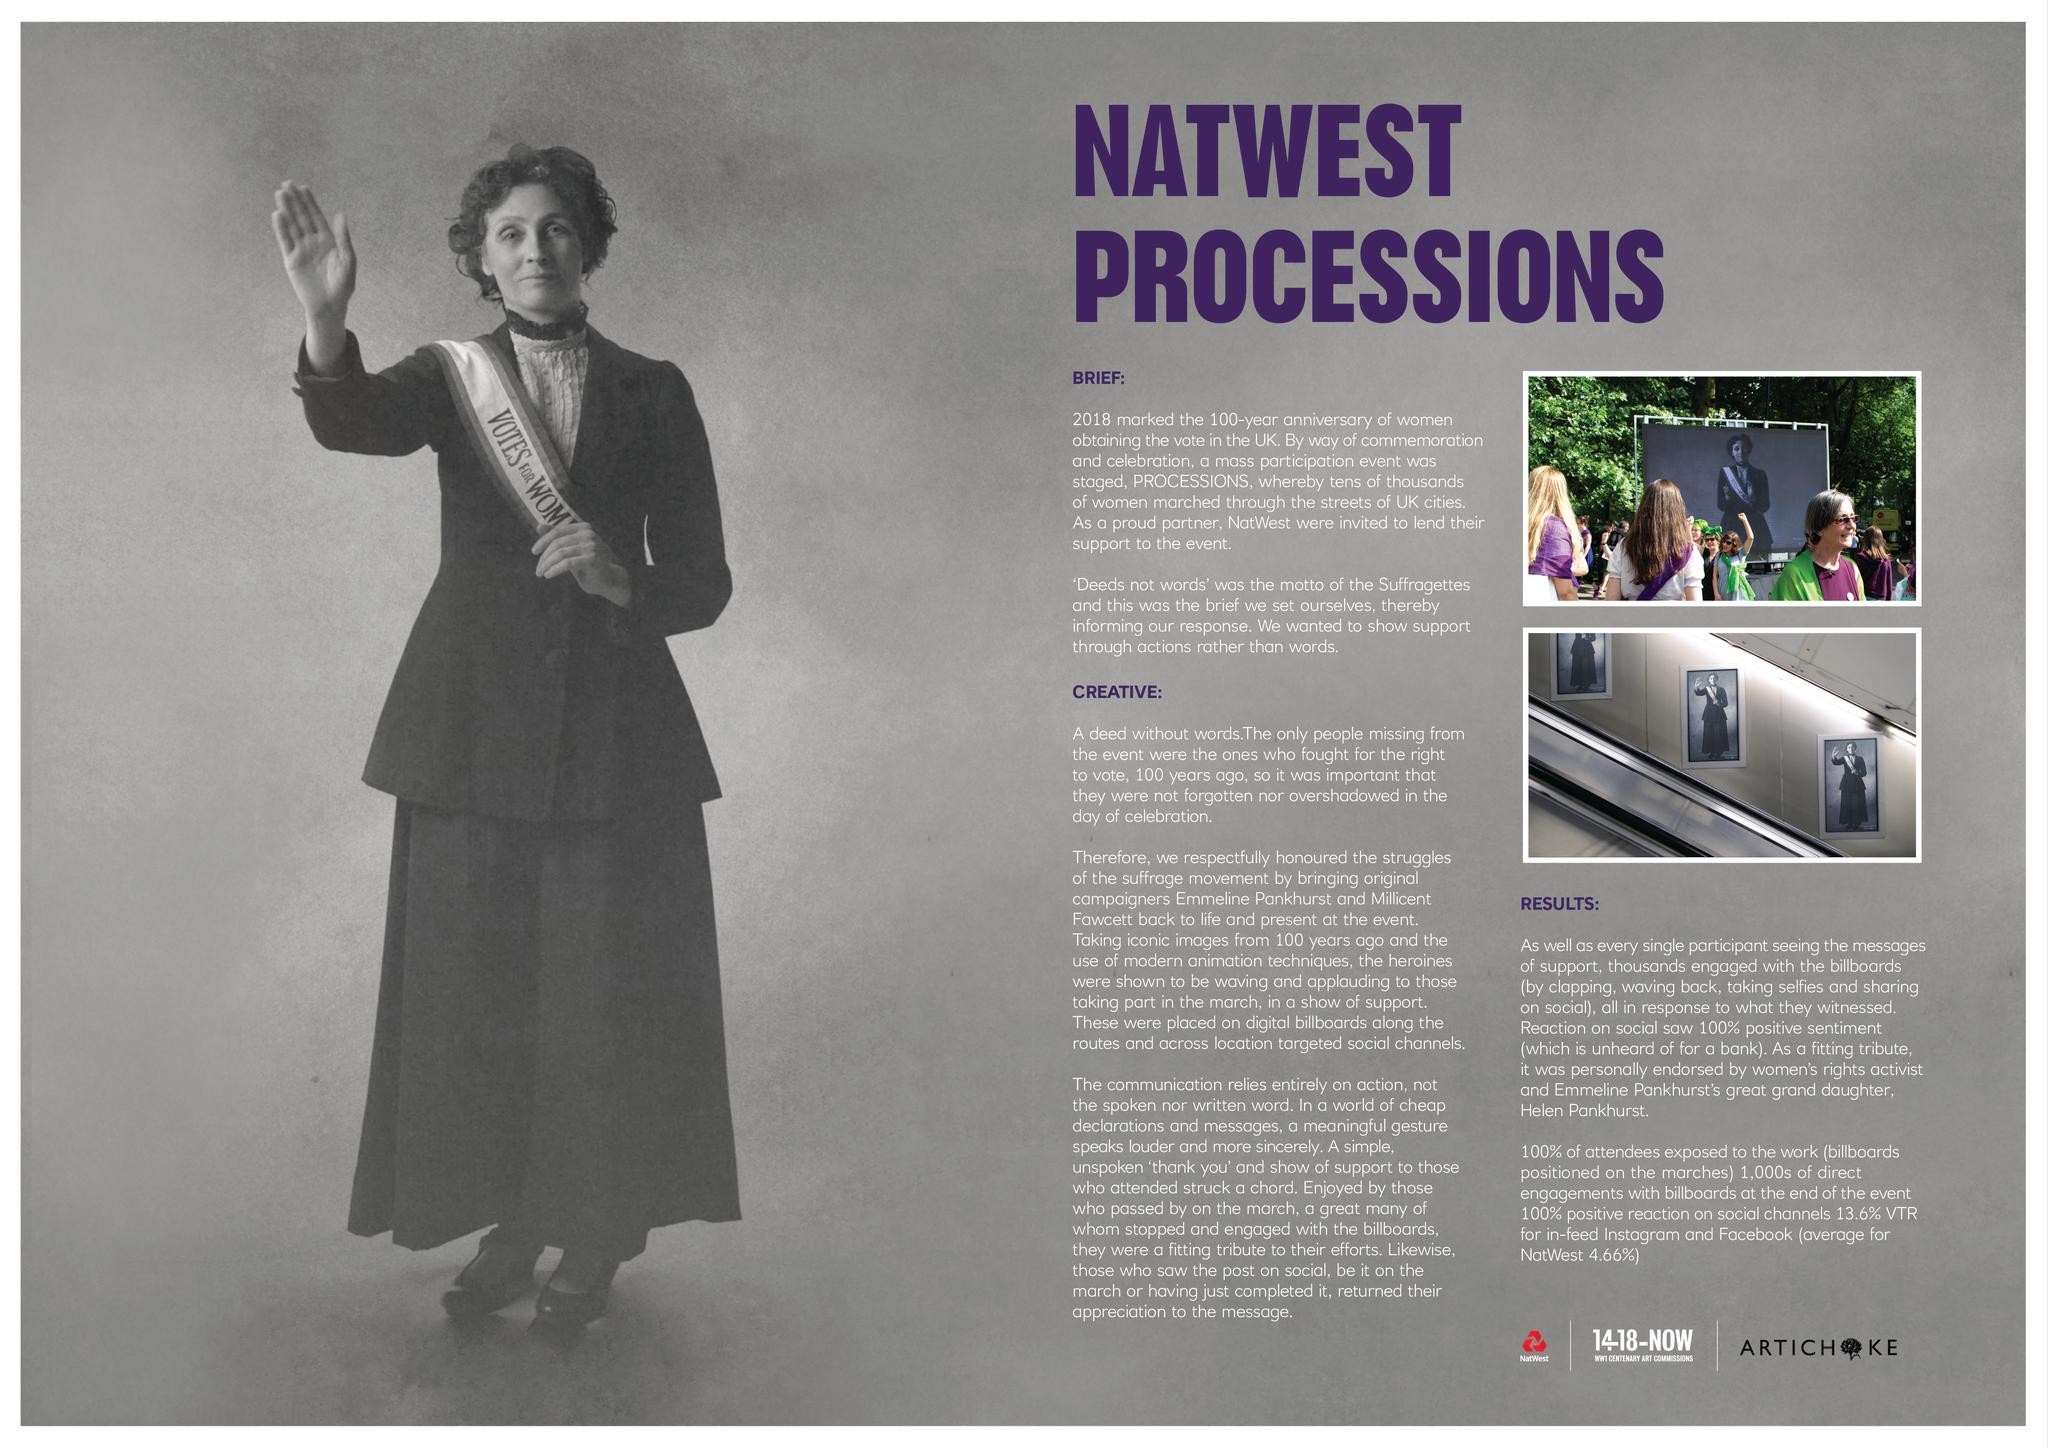 NatWest Processions